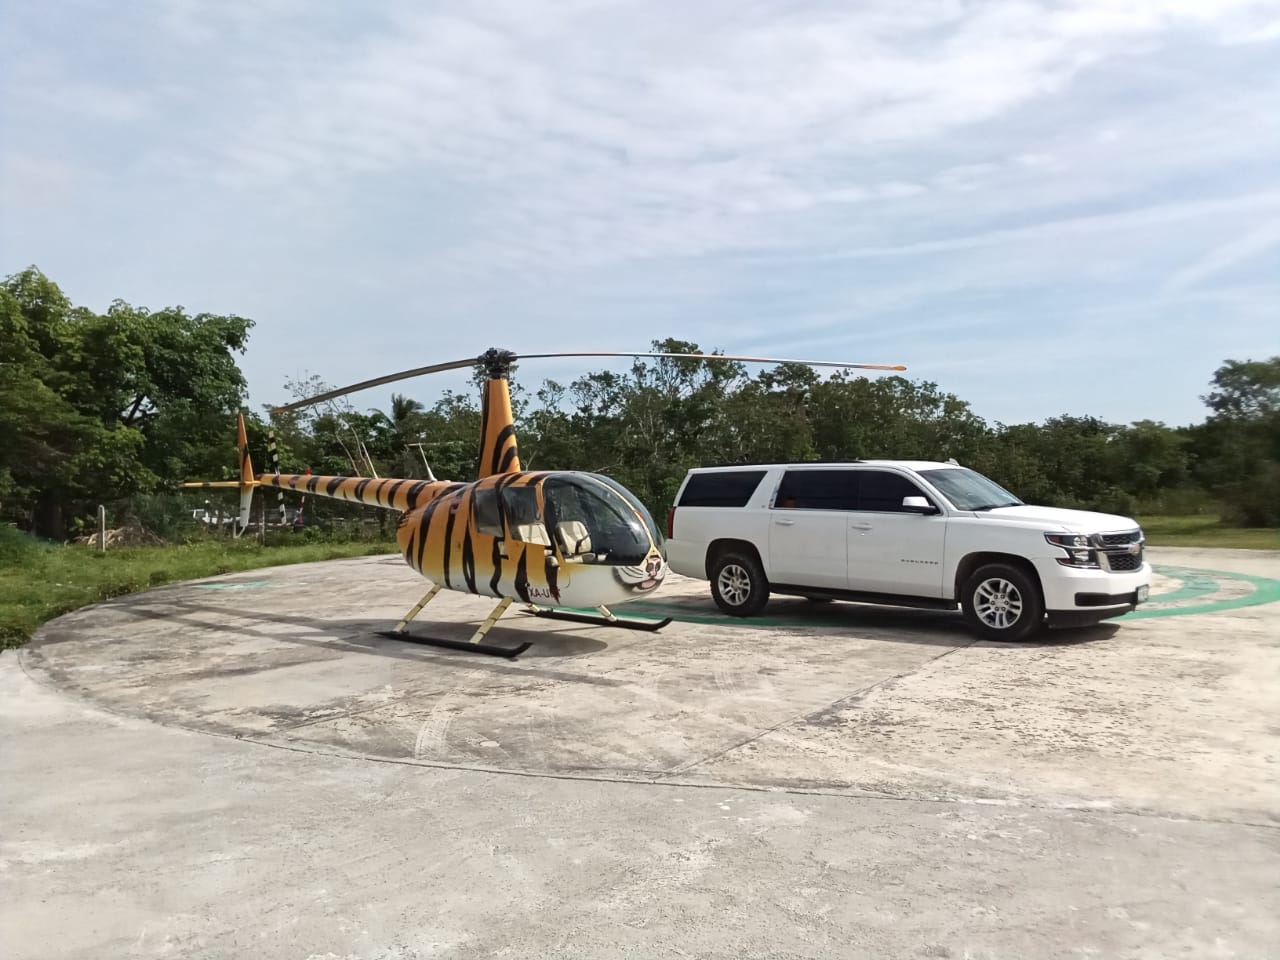 Helicopter and Yacht All Inclusive Tour by CANCUN HELICOPTER